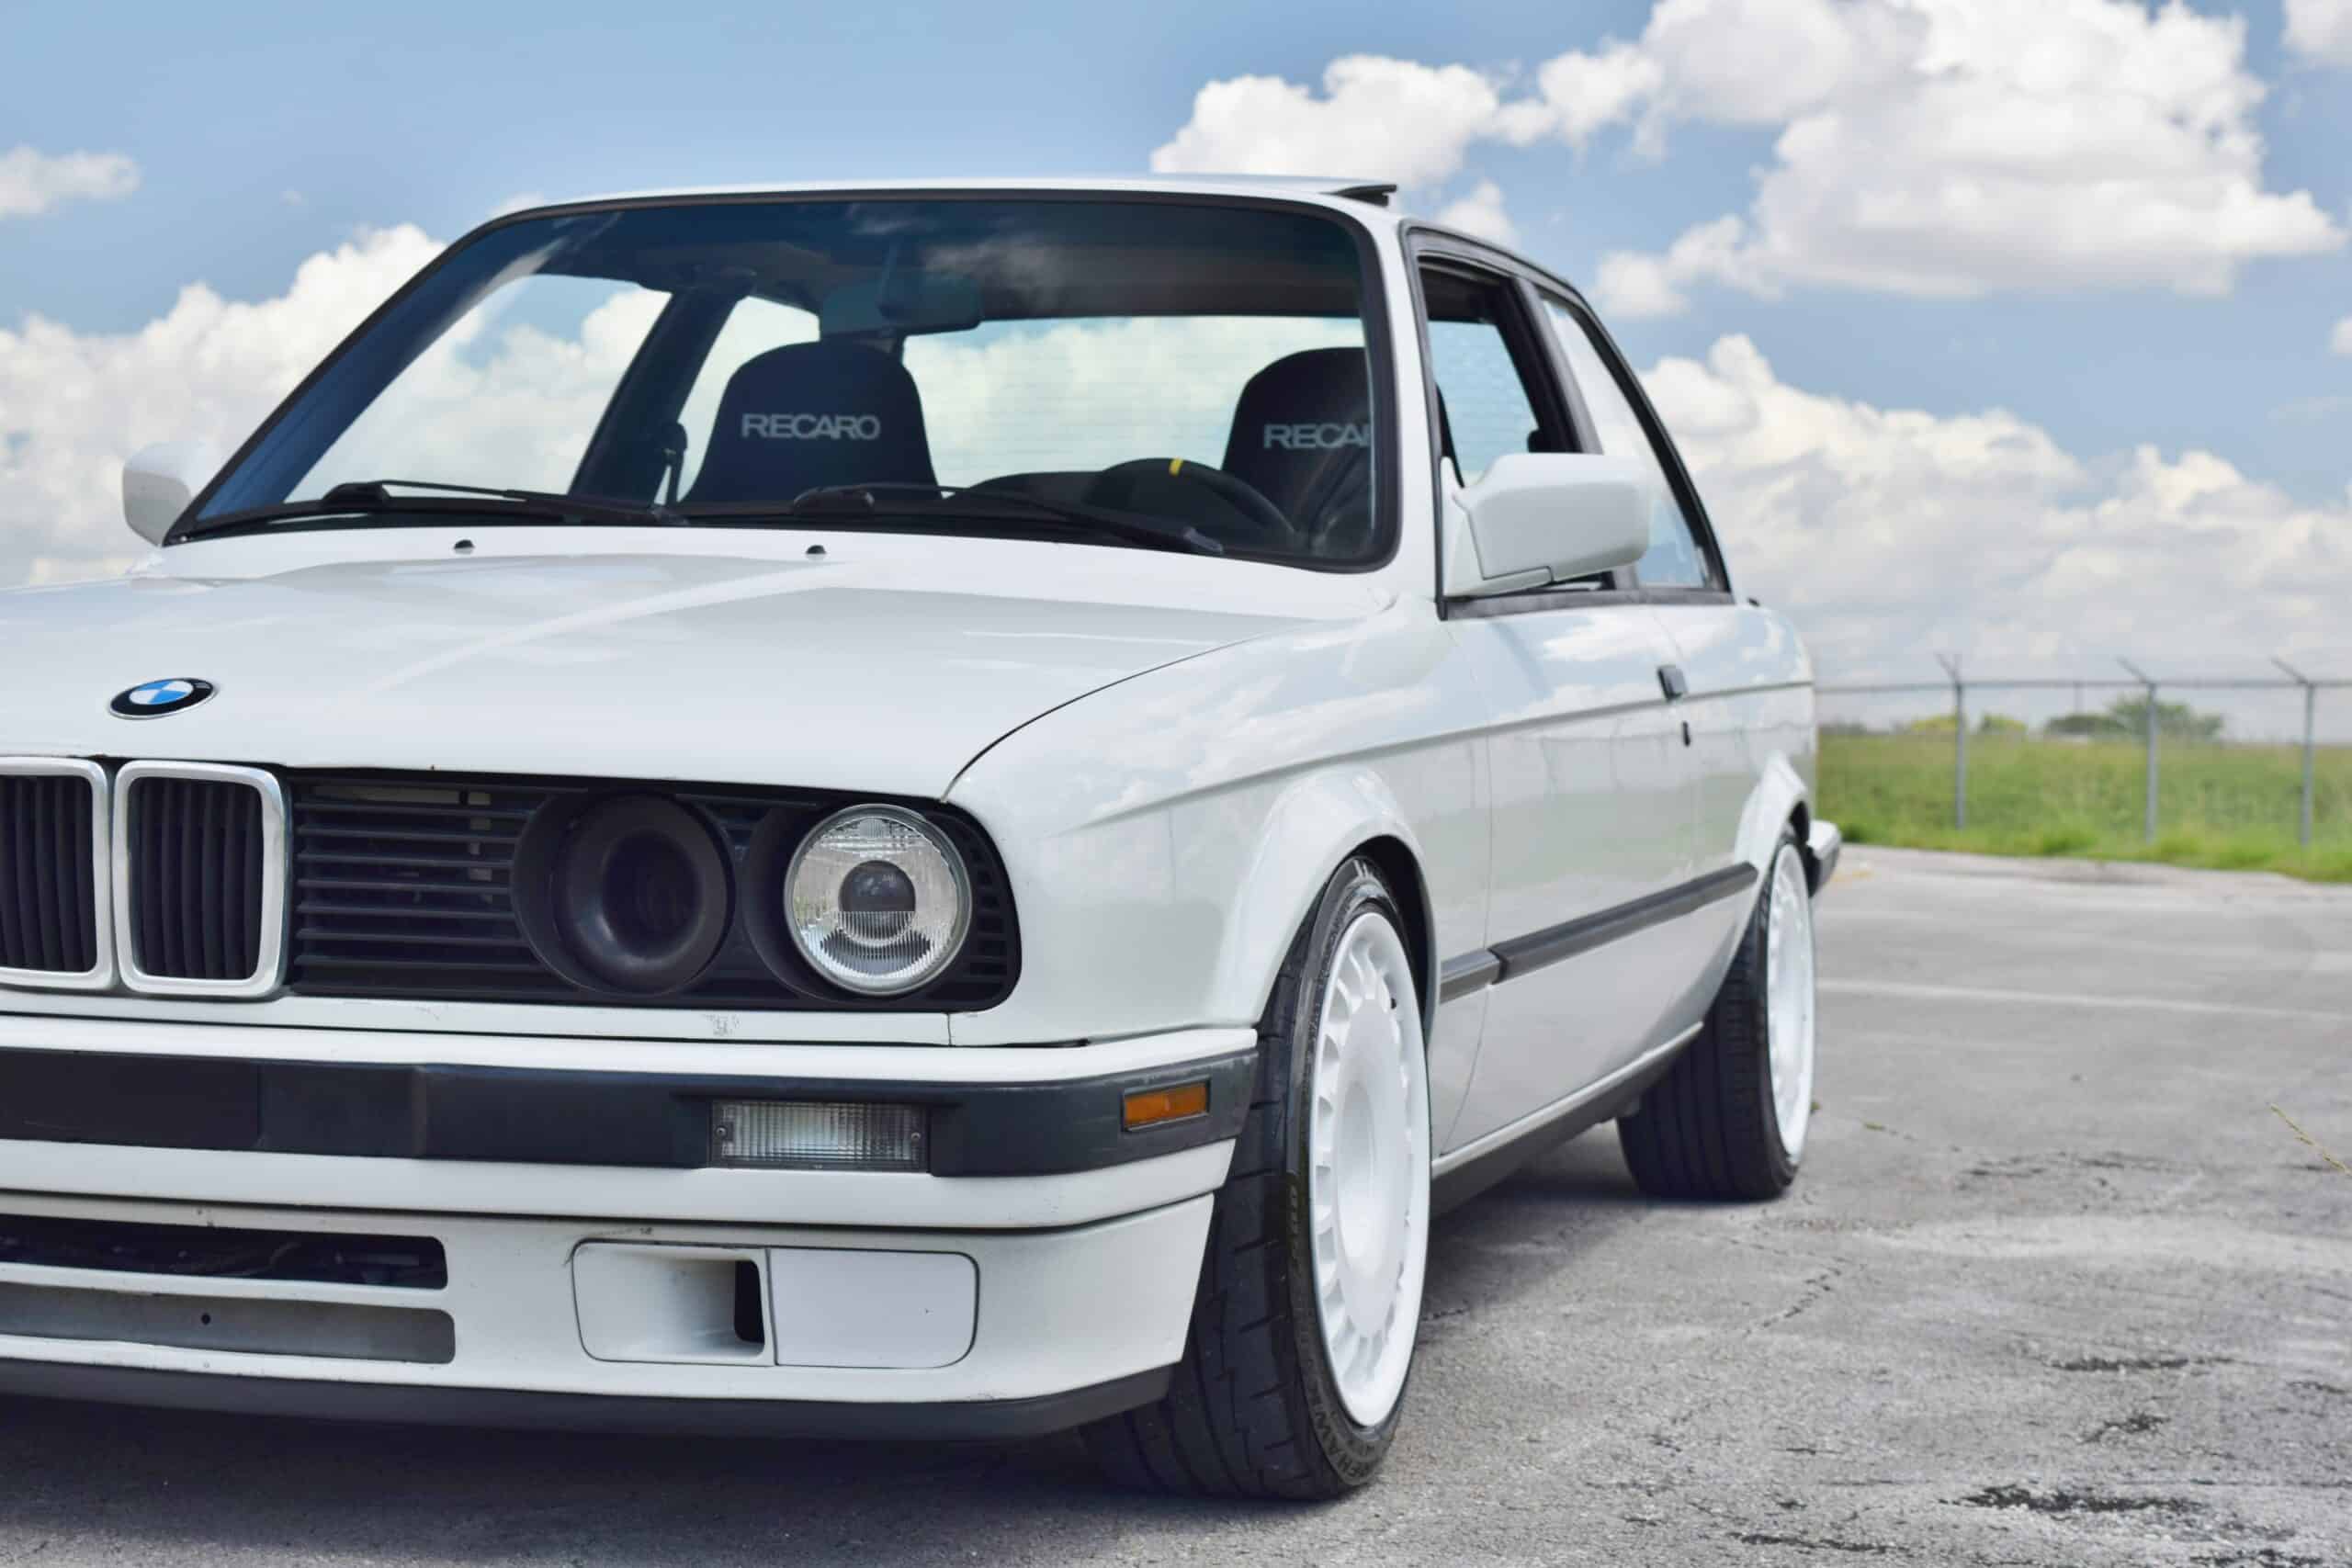 1991 BMW 3-Series E30 318IS -S50 Swap- Recaro Seats – 5 Speed Manual – Well Sorted – Excellent Driver